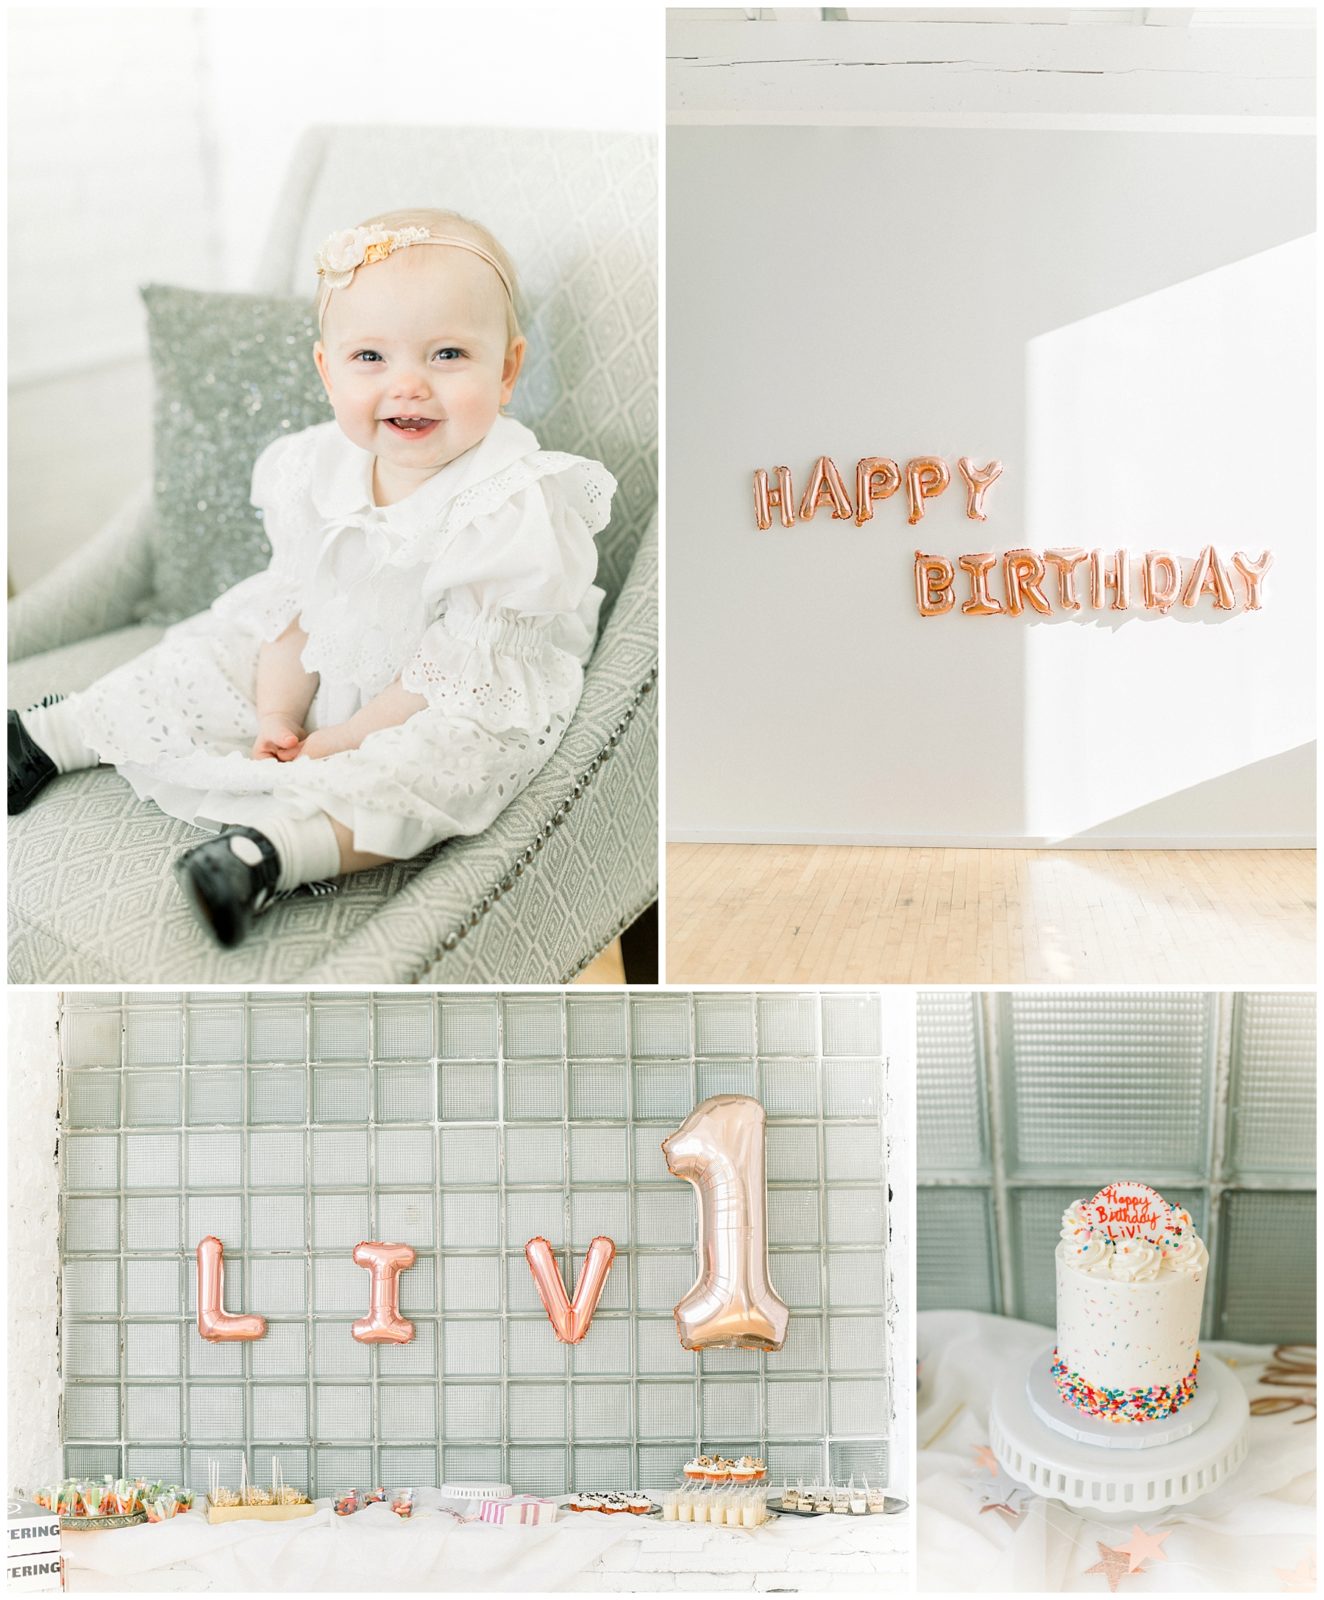 My daughter's light and airy birthday party